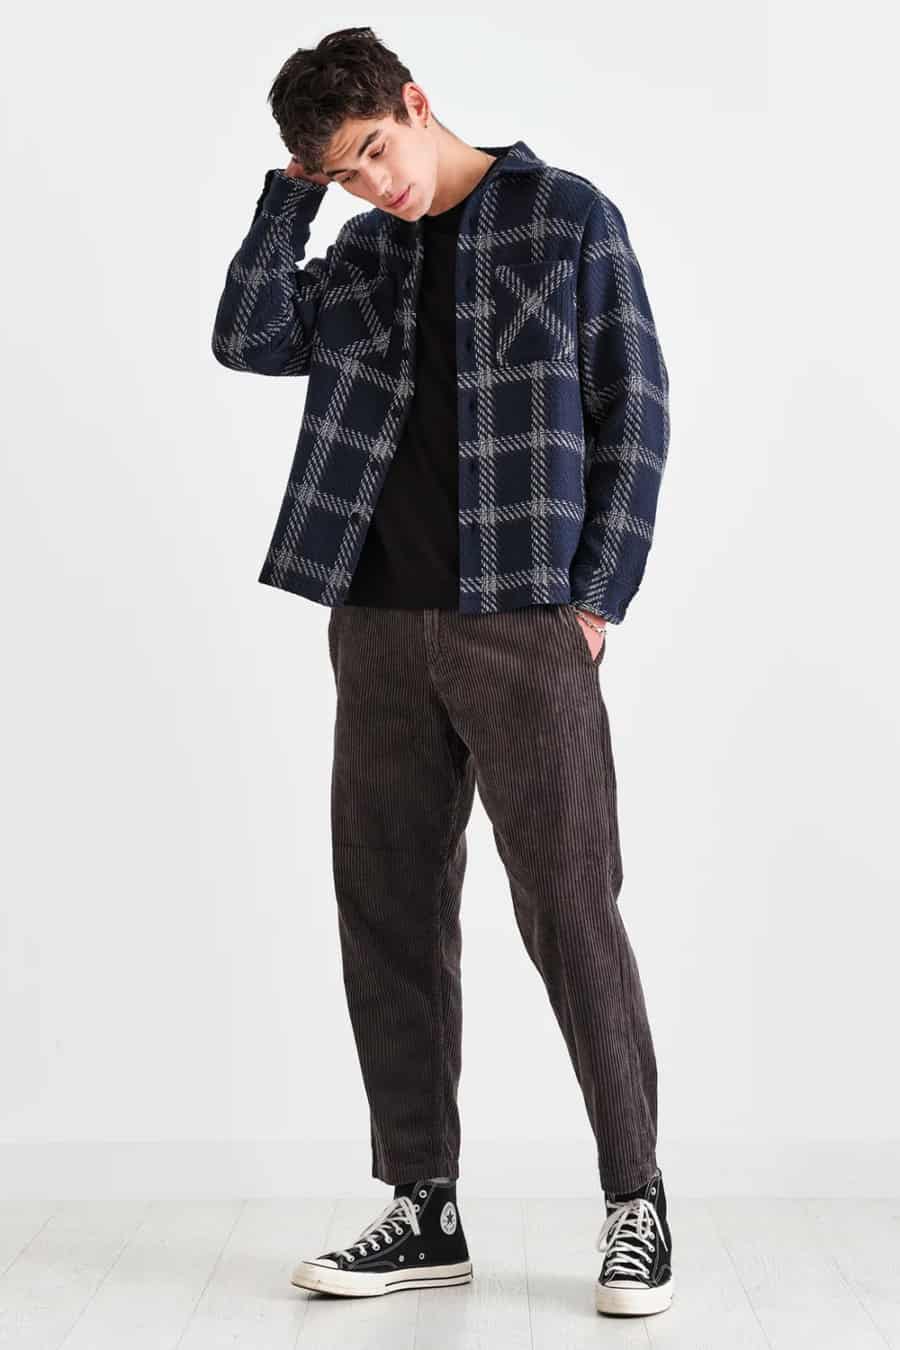 Men's corduroy trousers, black T-shirt, flannel check overshirt and black Converse high-tops outfit